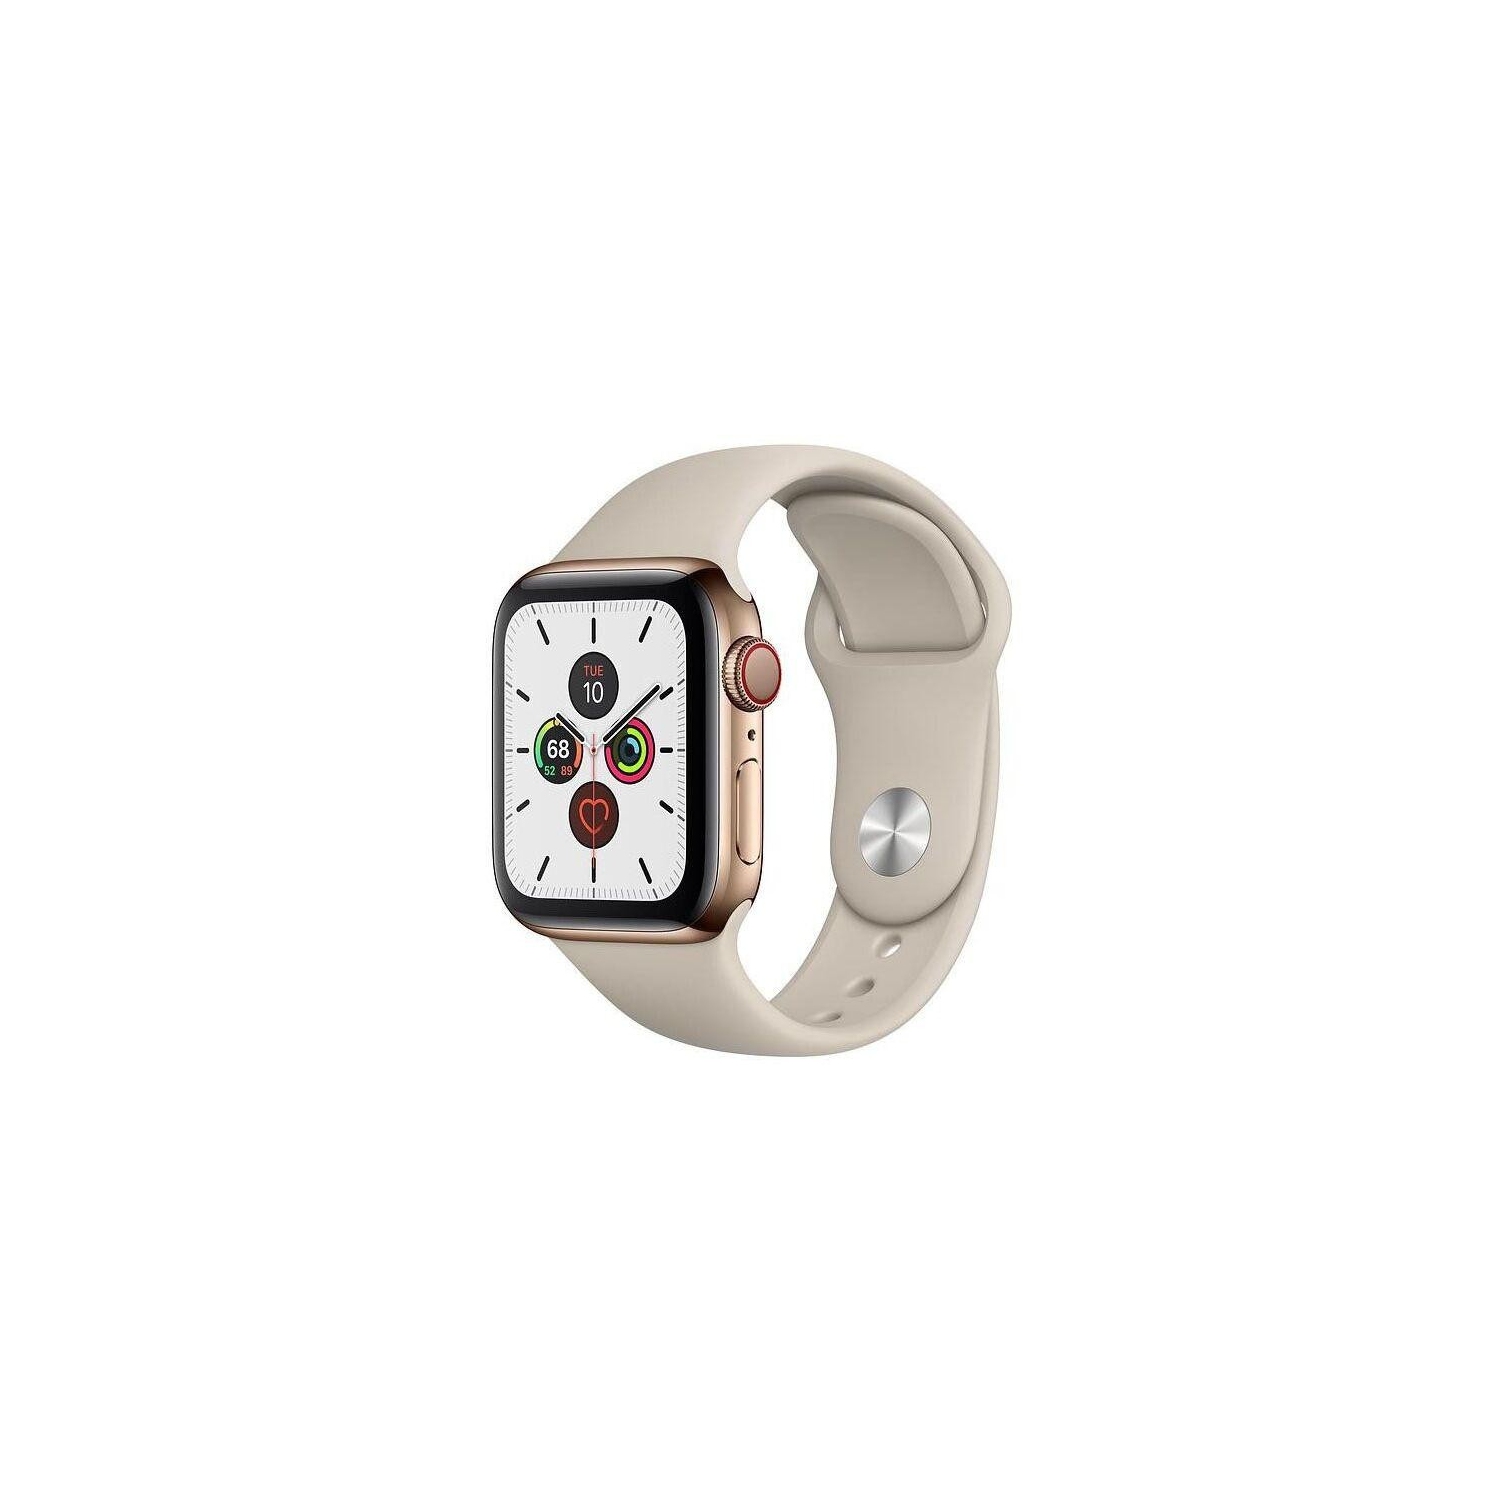 Apple Watch Series 5 44mm (GPS + Cellular) - gold stainless steel Case with Stone Sport Band